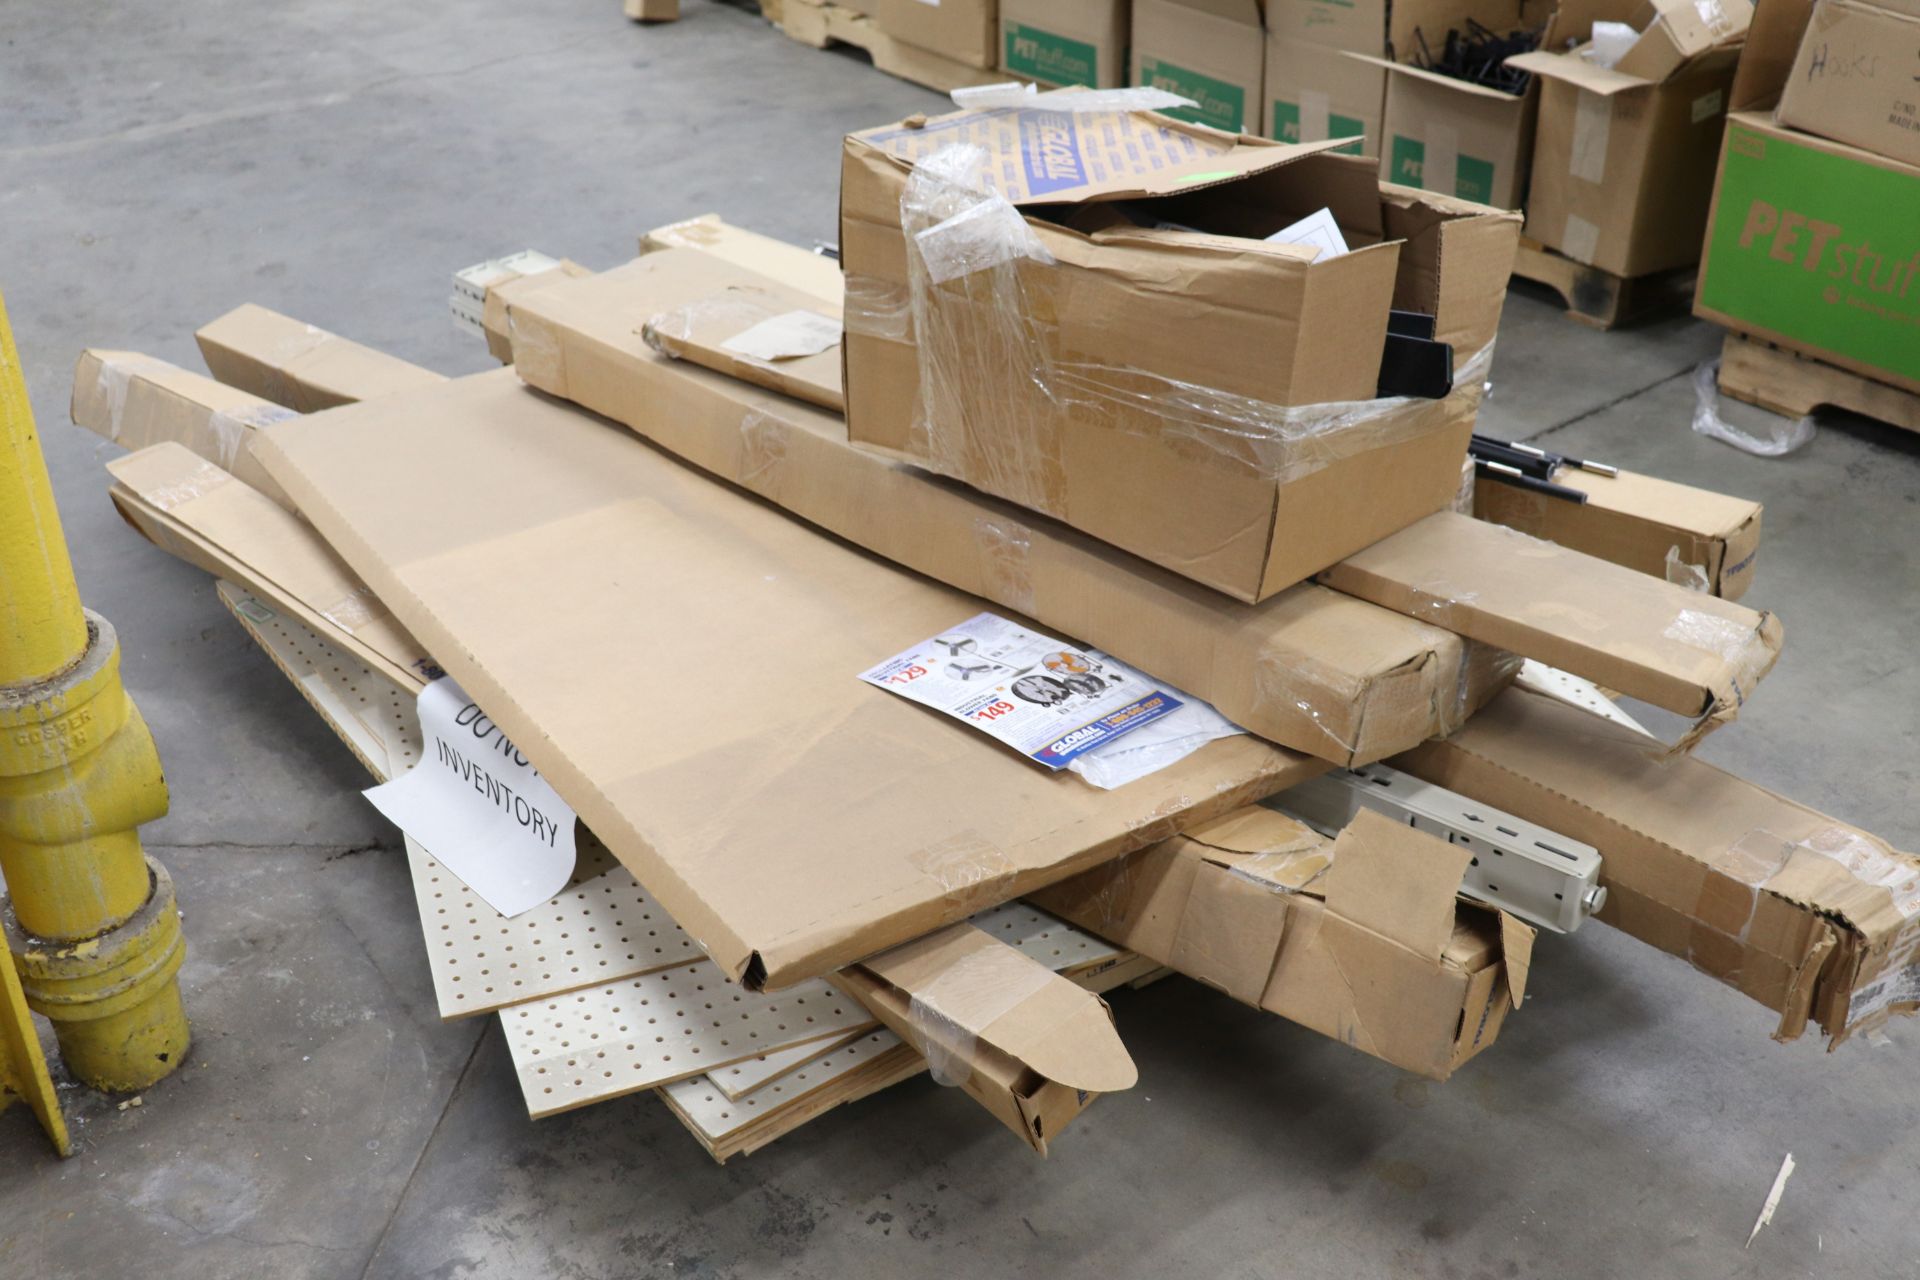 One pallet of display sign stands, pegboard, wall mounted shelf, and support brackets